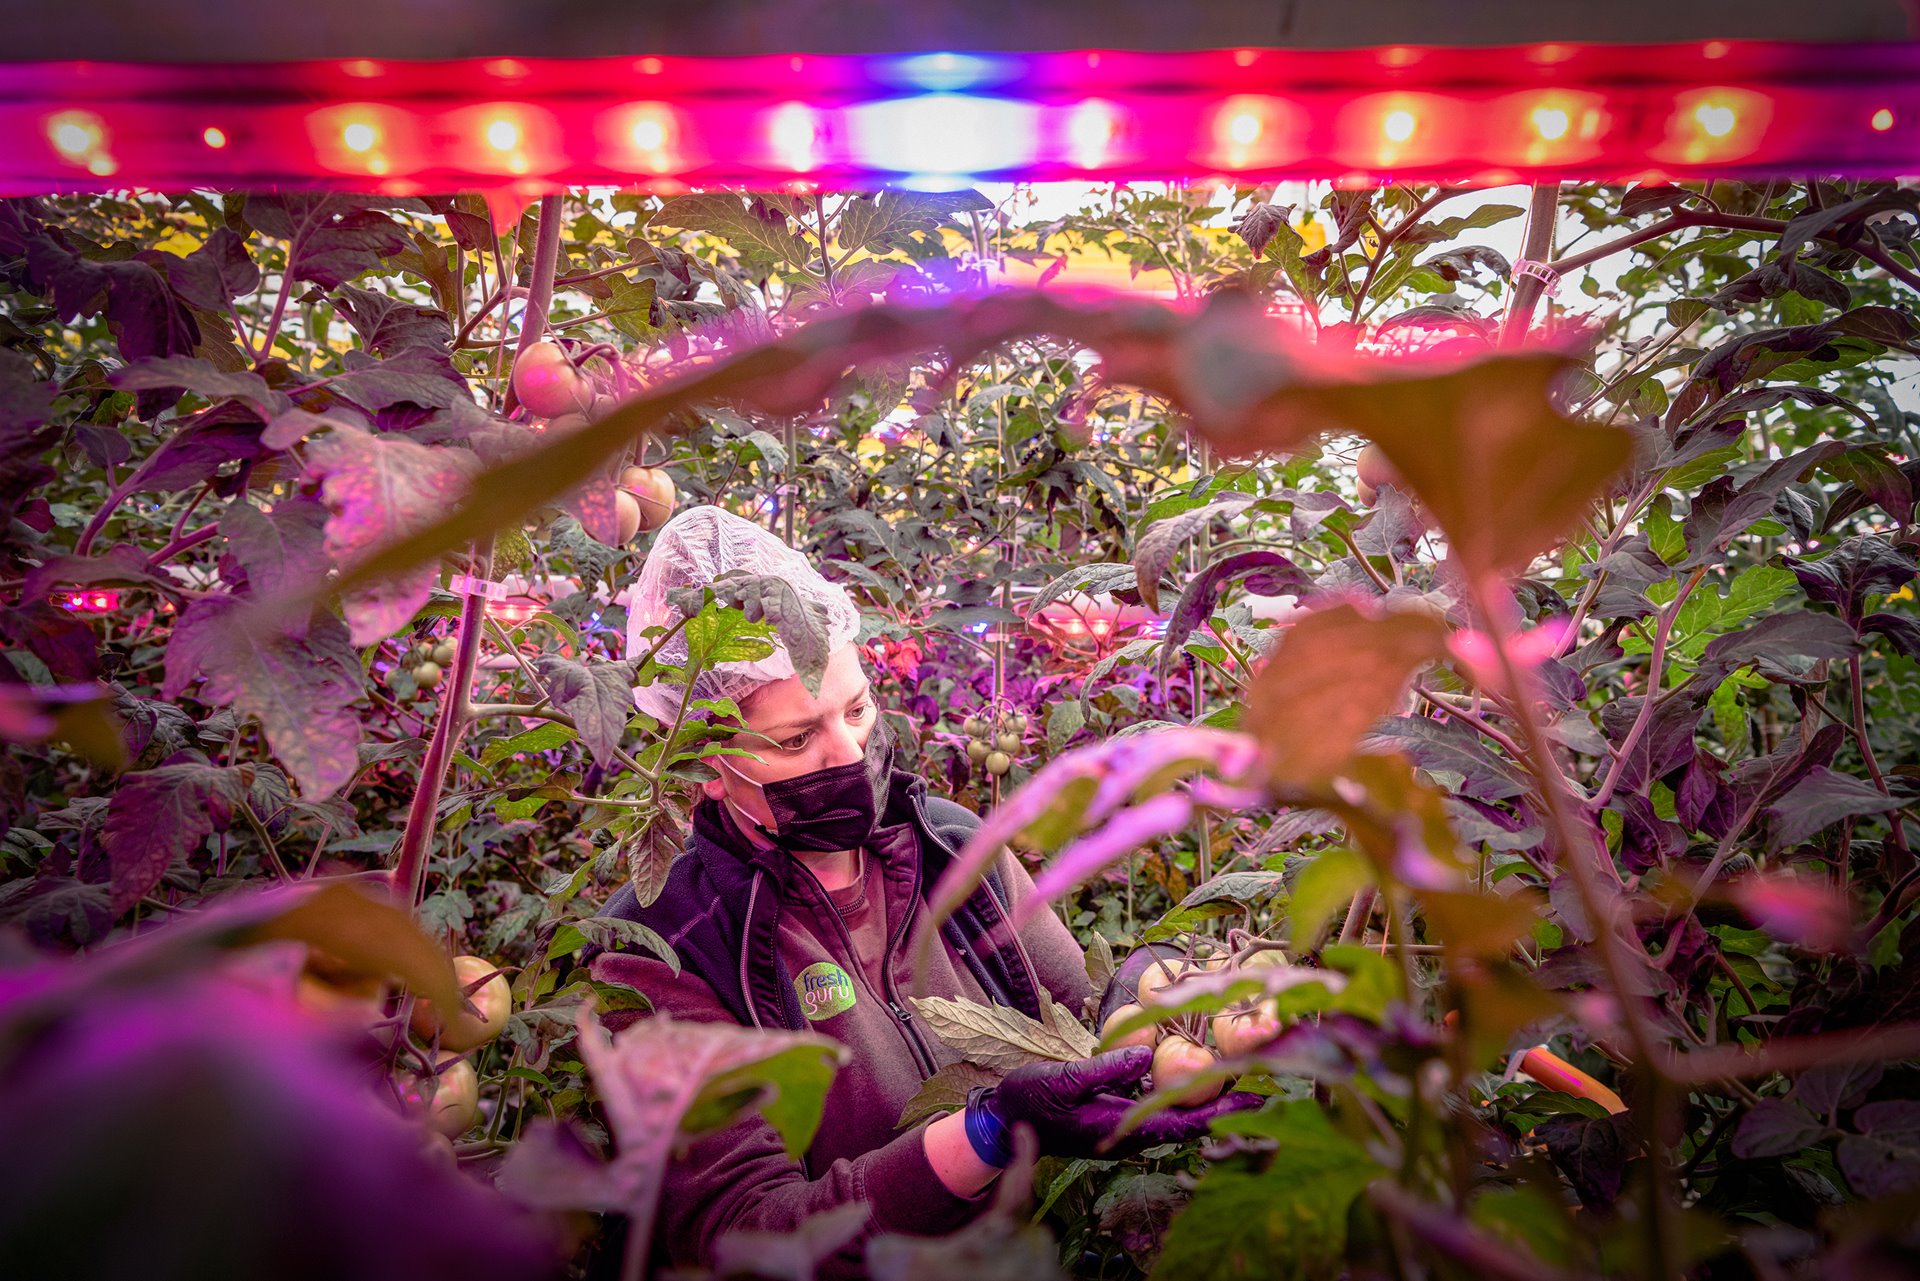 <p>A worker harvests tomatoes in a greenhouse in Ostellato, Italy. High-efficiency LED lights using 100 percent green energy provided by a nearby biogas plant ensure sustainable year-round production. Herbicides and glyphosates are not needed in the controlled environment.</p>
